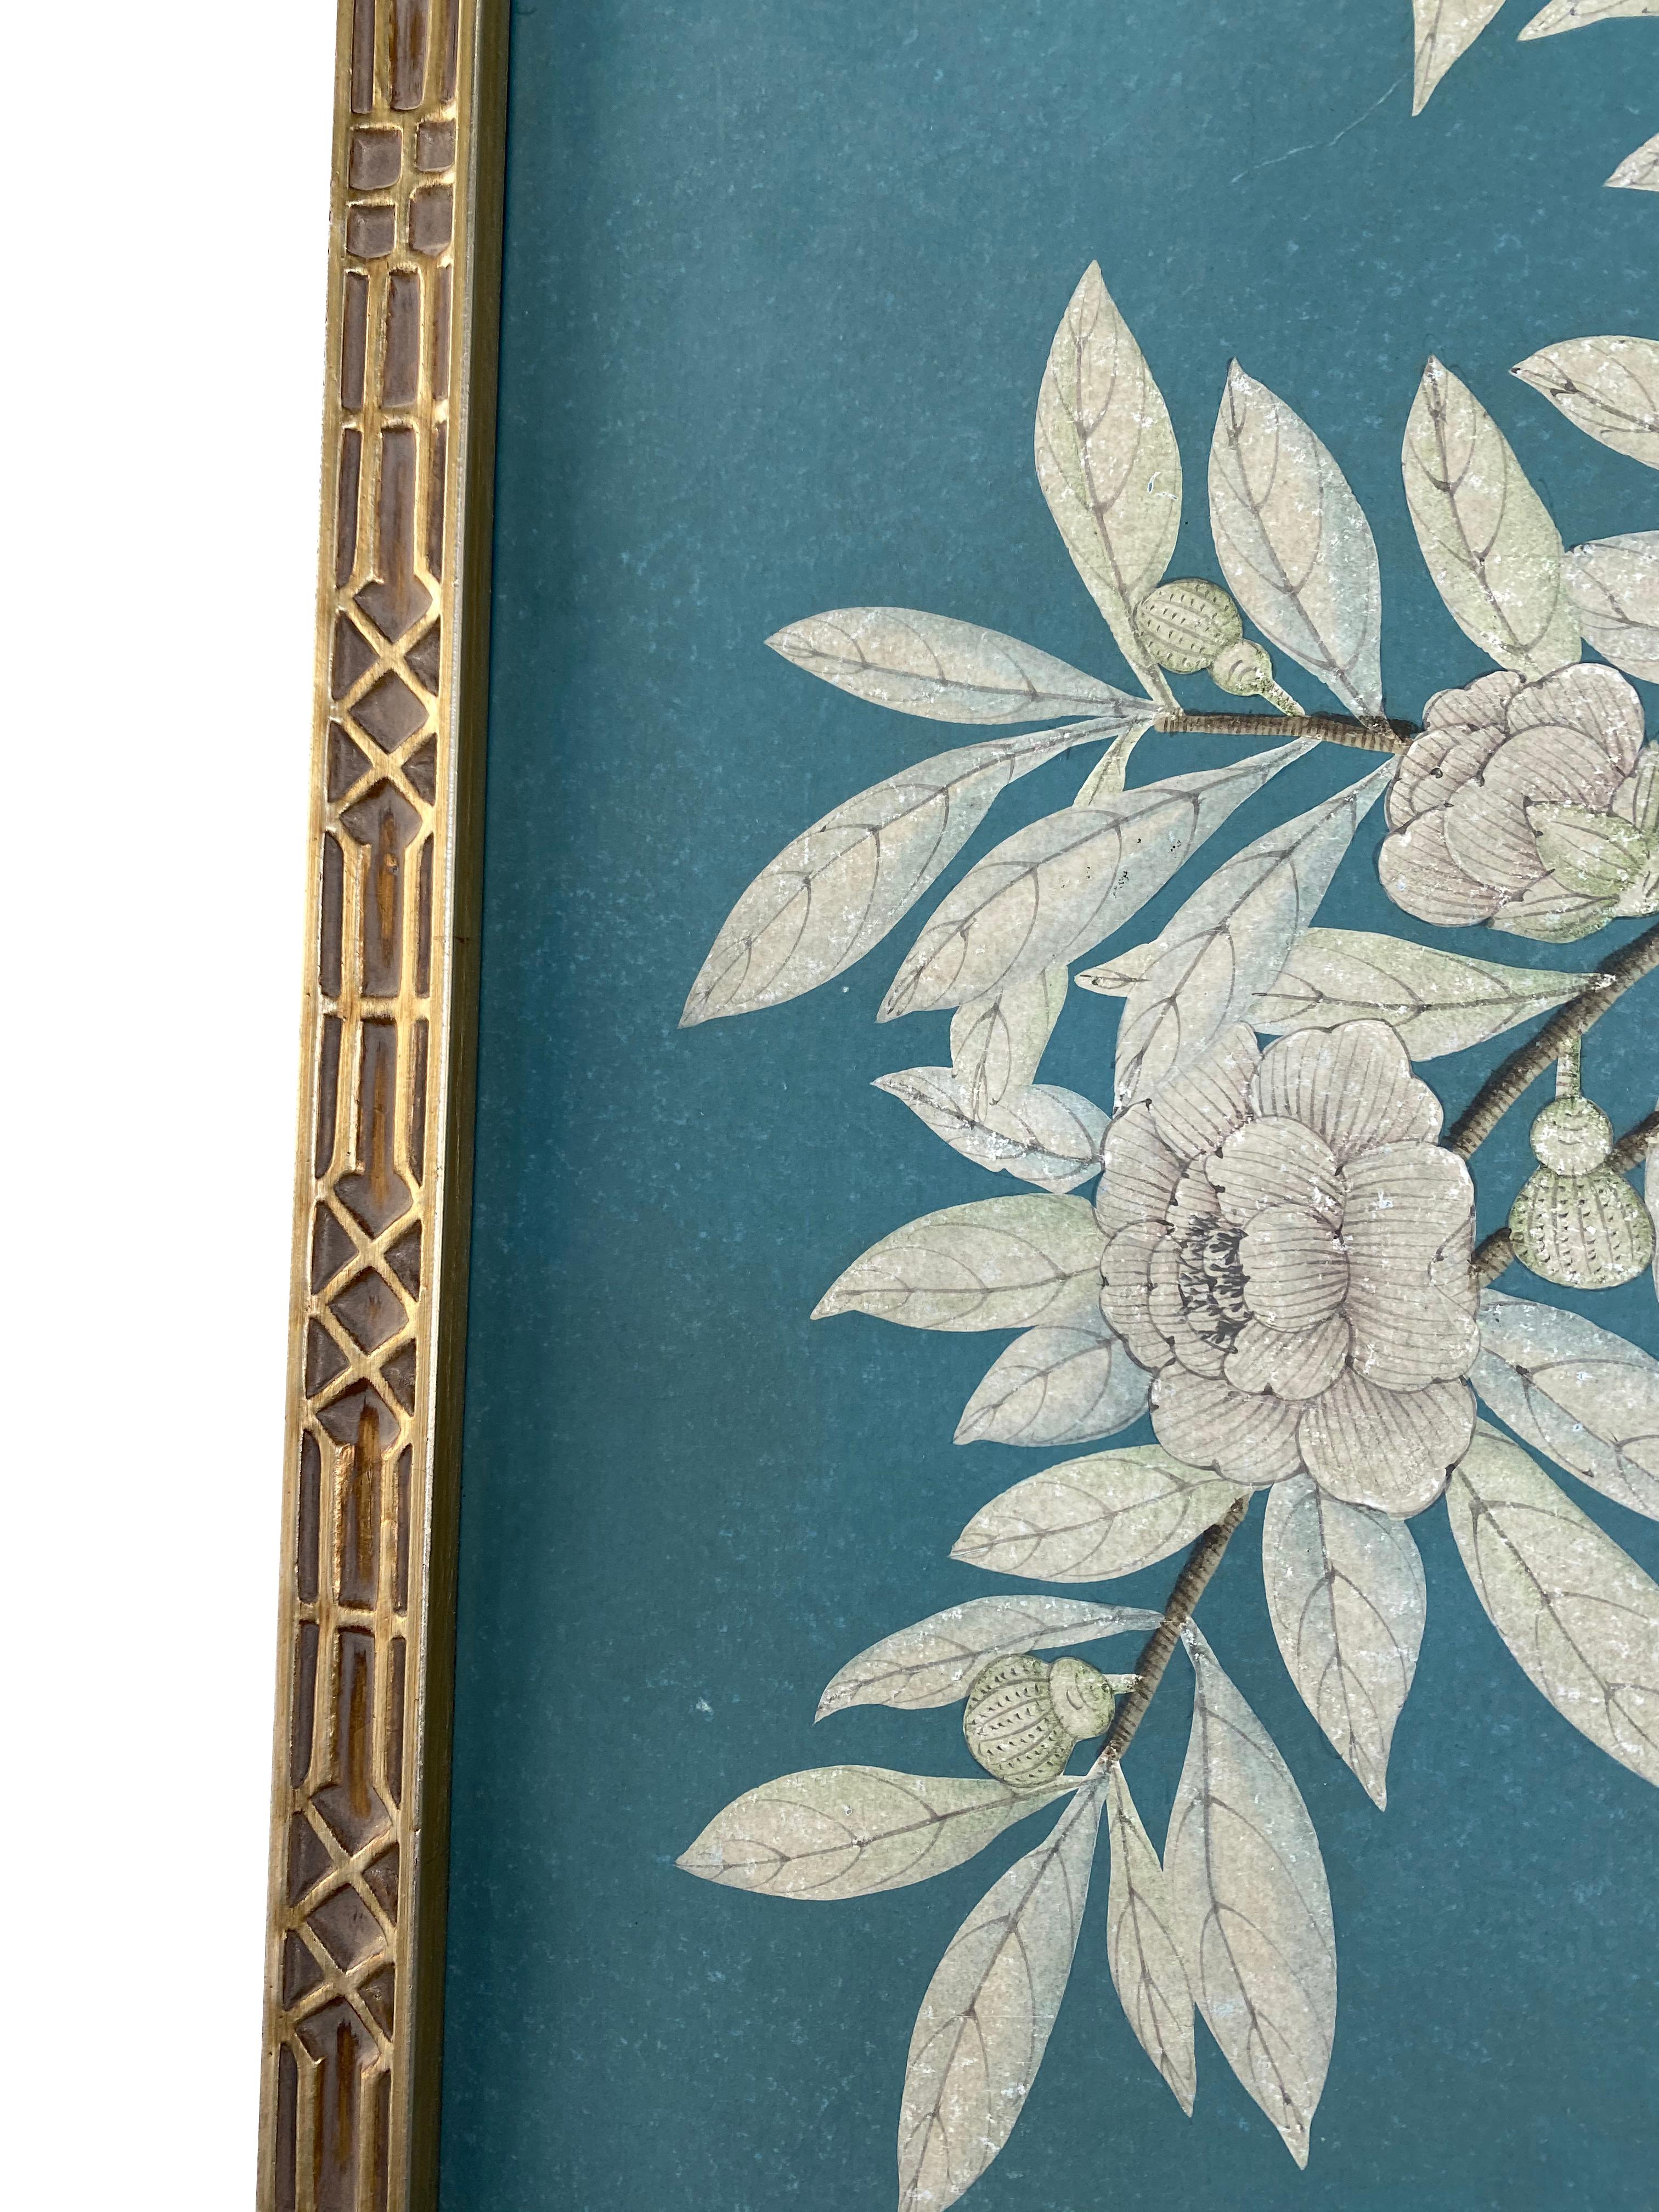 The most elegant hand painted wallpapers since 1898, this grand scale Gracie panel, in a silver leafed carved frame, depicts an Asian-style flowering tree with birds.

